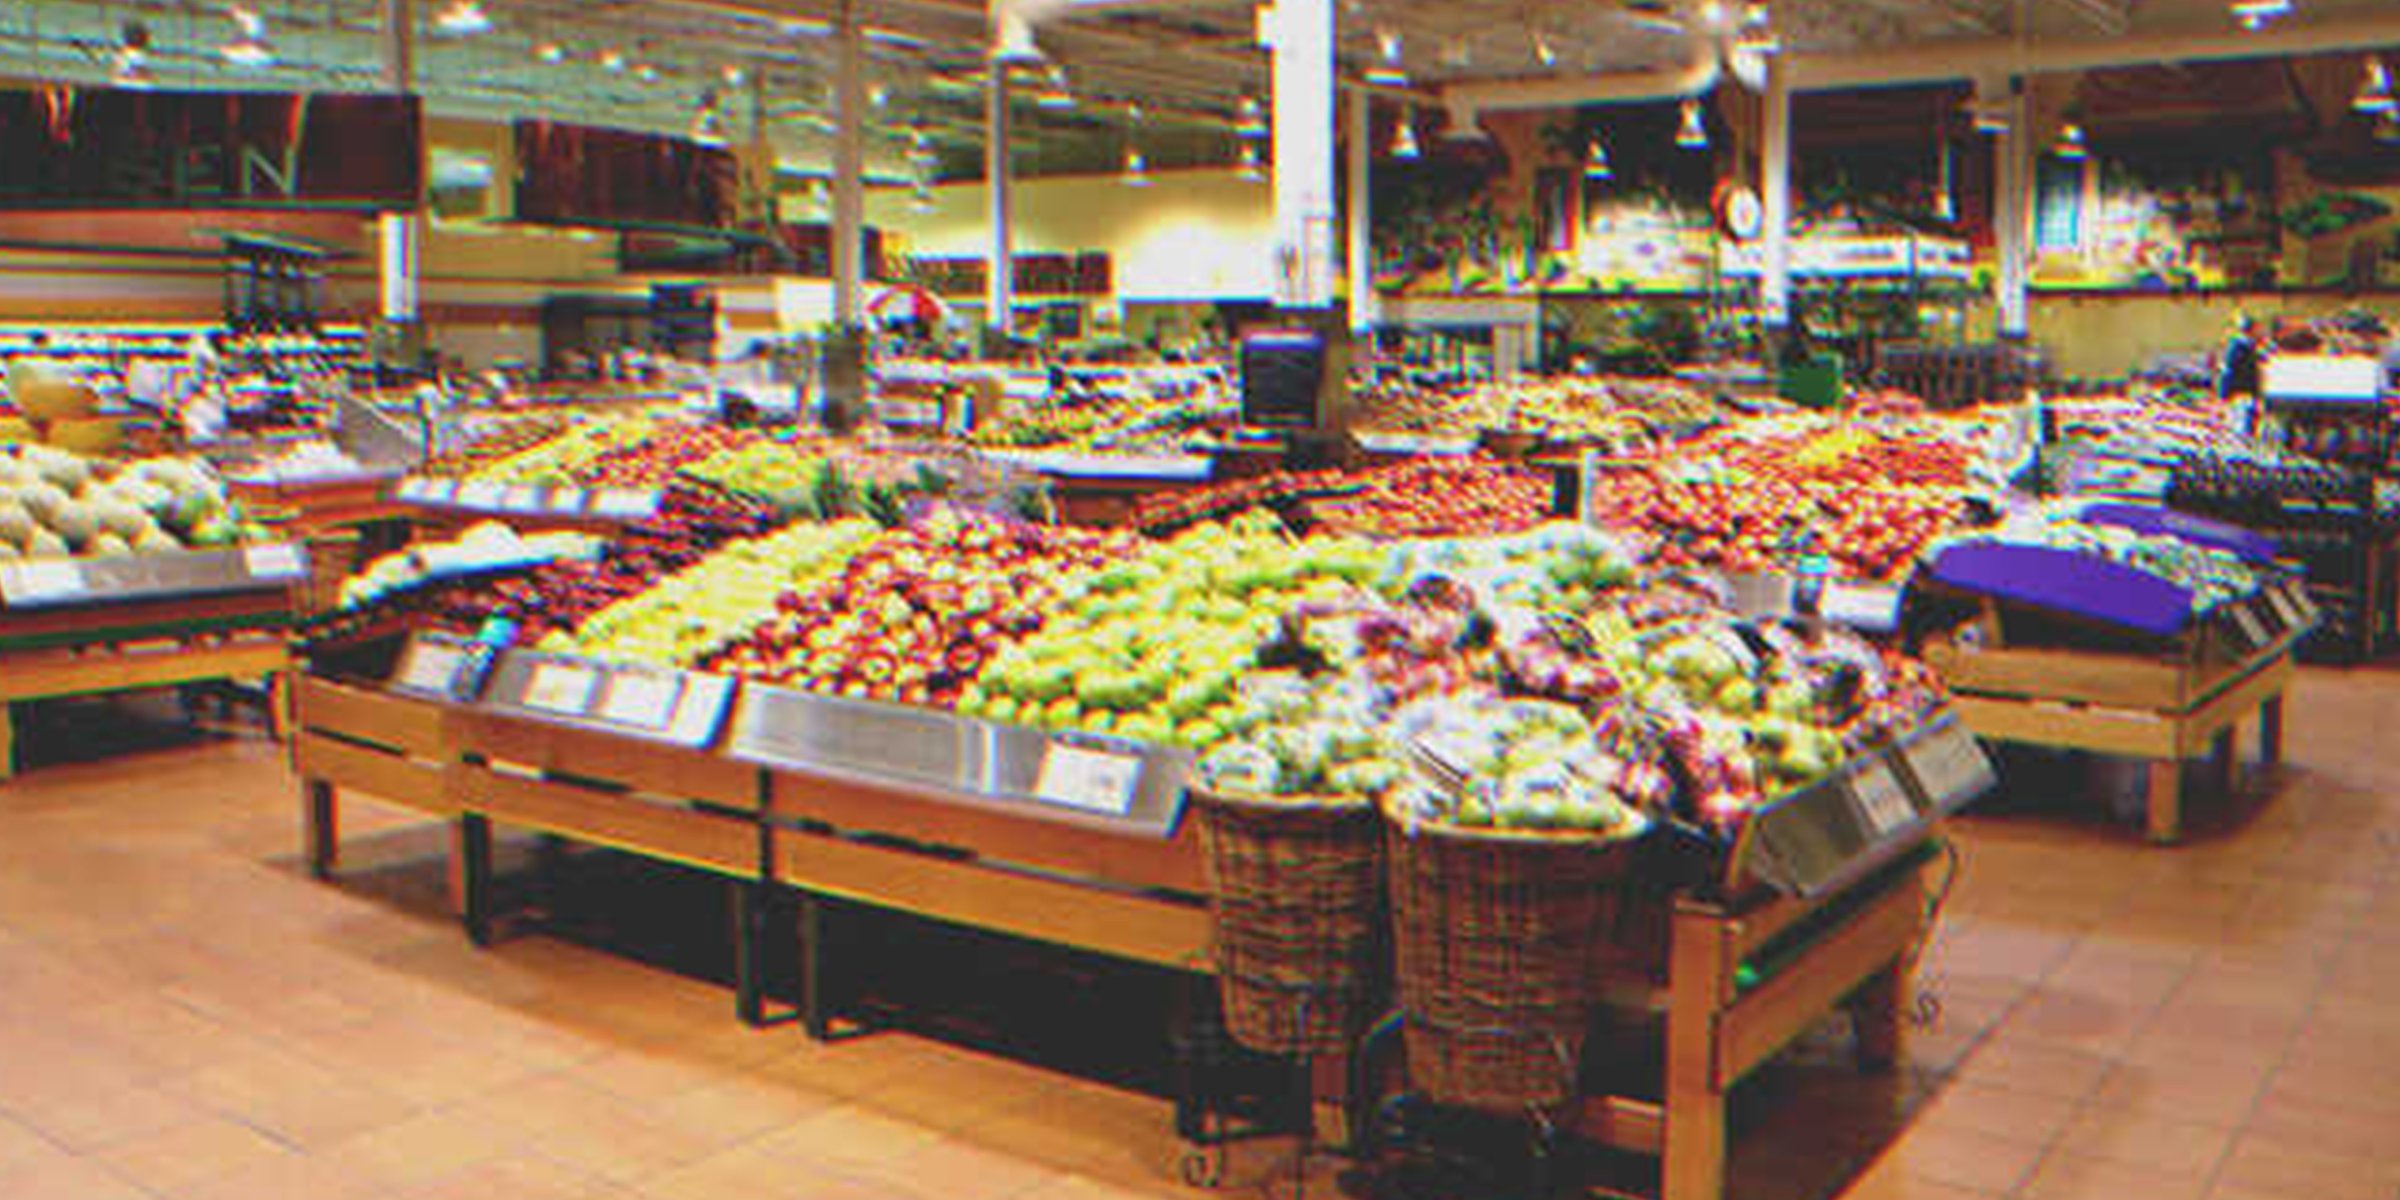 Grocery store | Source: Shutterstock